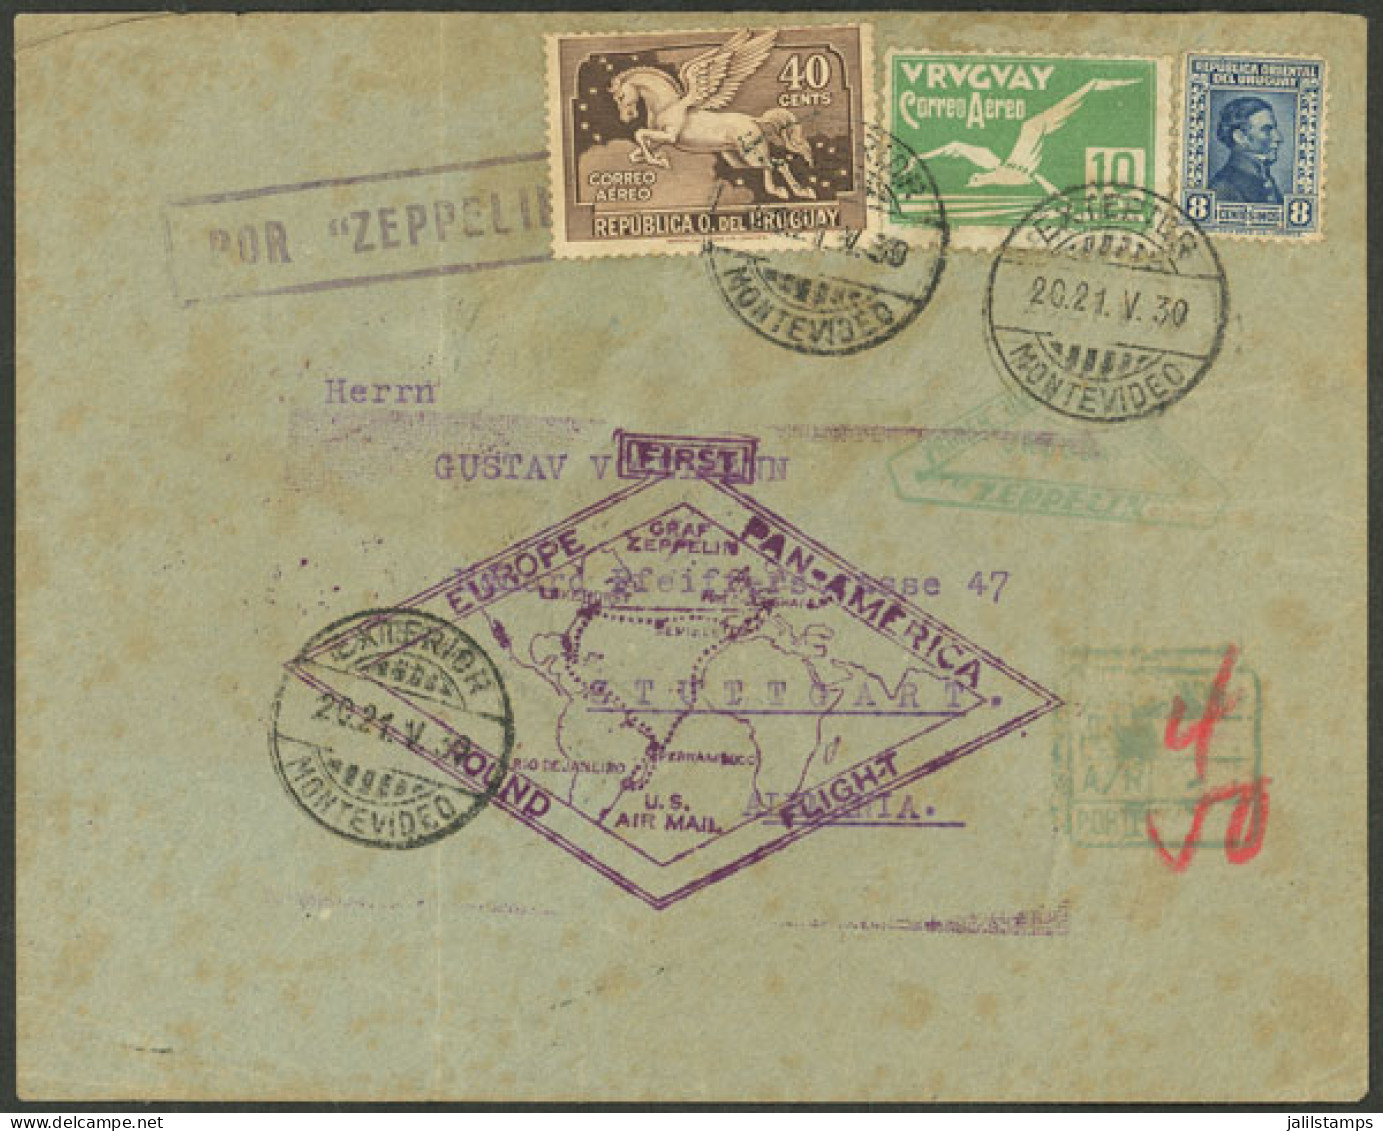 URUGUAY: 21/MAY/1930 Montevideo - Germany, Cover Flown By Zeppelin, On Back There Is An Arrival Mark Of Friedrichshafen  - Uruguay